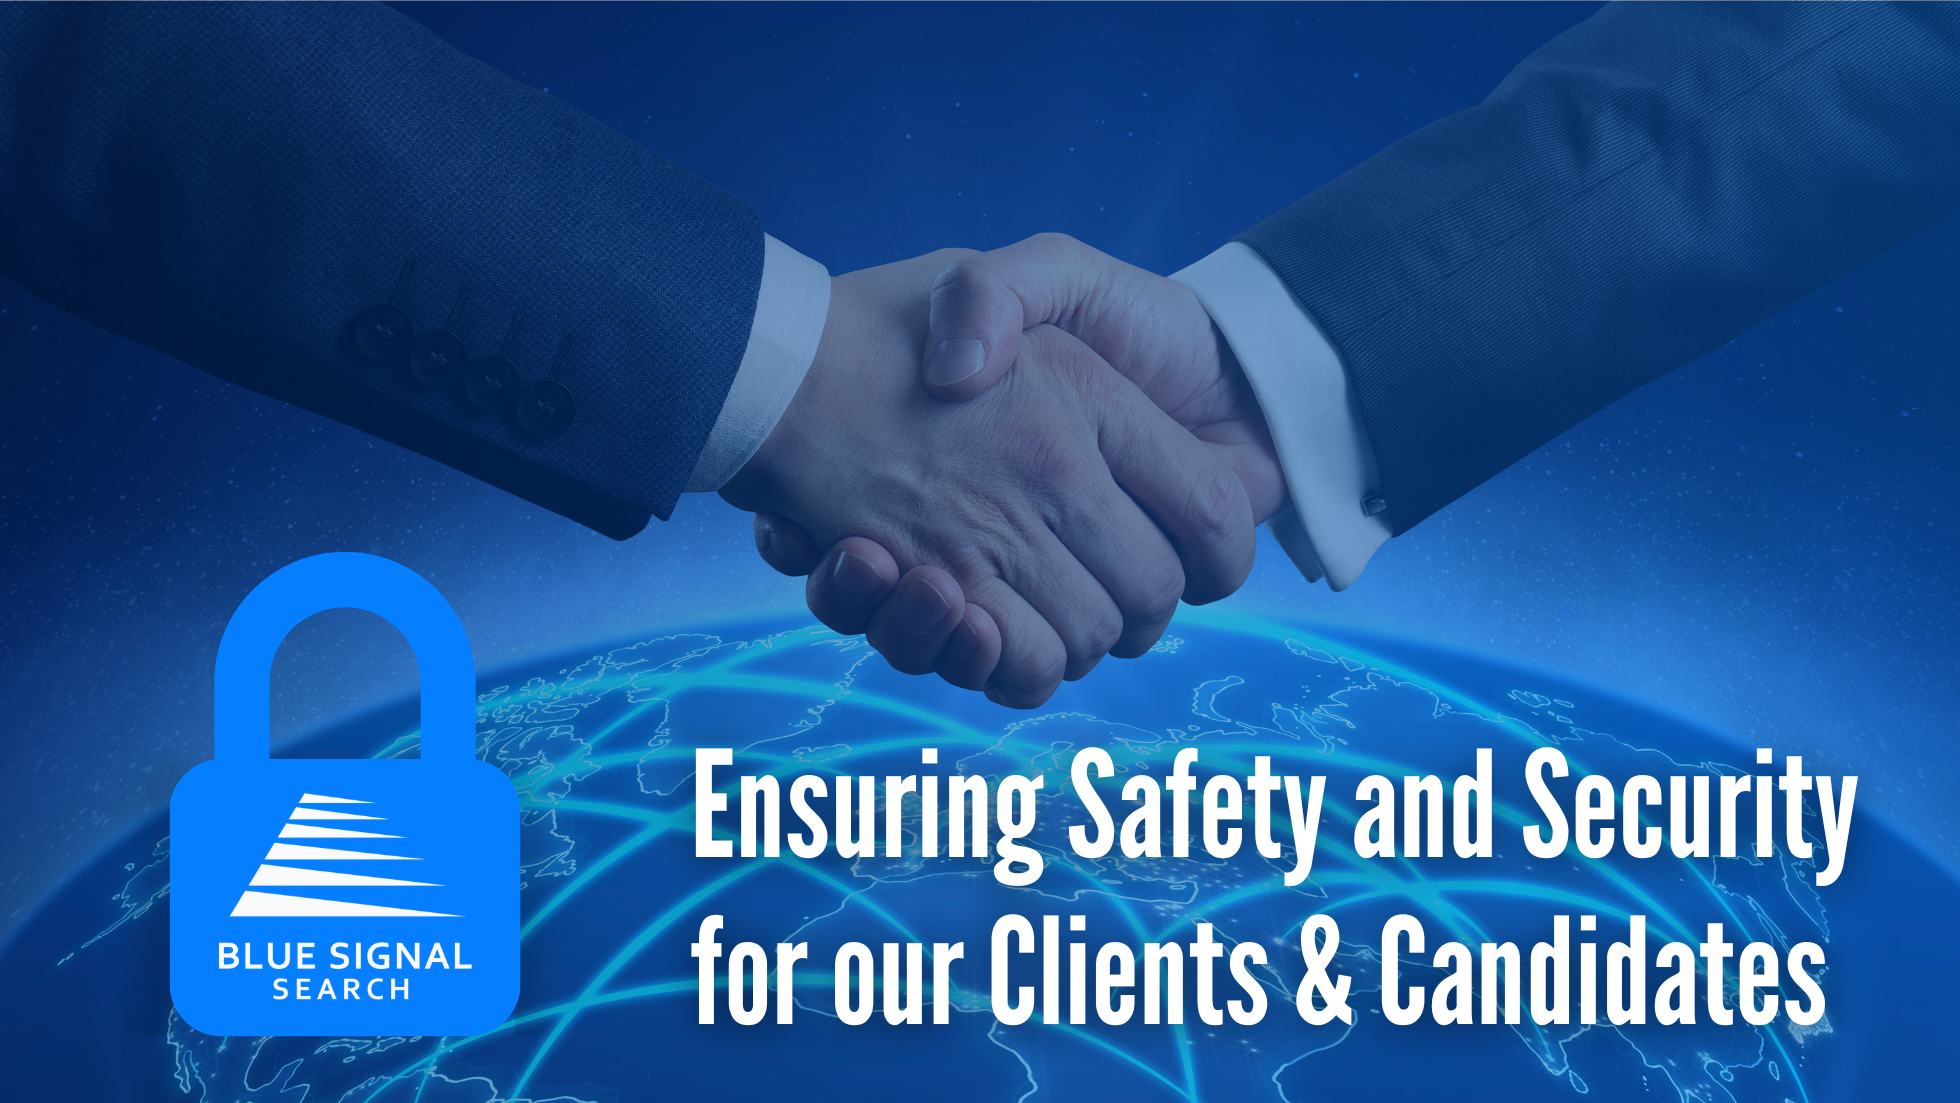 Two professionals shaking hands over a global background, symbolizing Blue Signal's commitment to ensuring safety and security for clients and candidates, in contrast to fake recruiters.